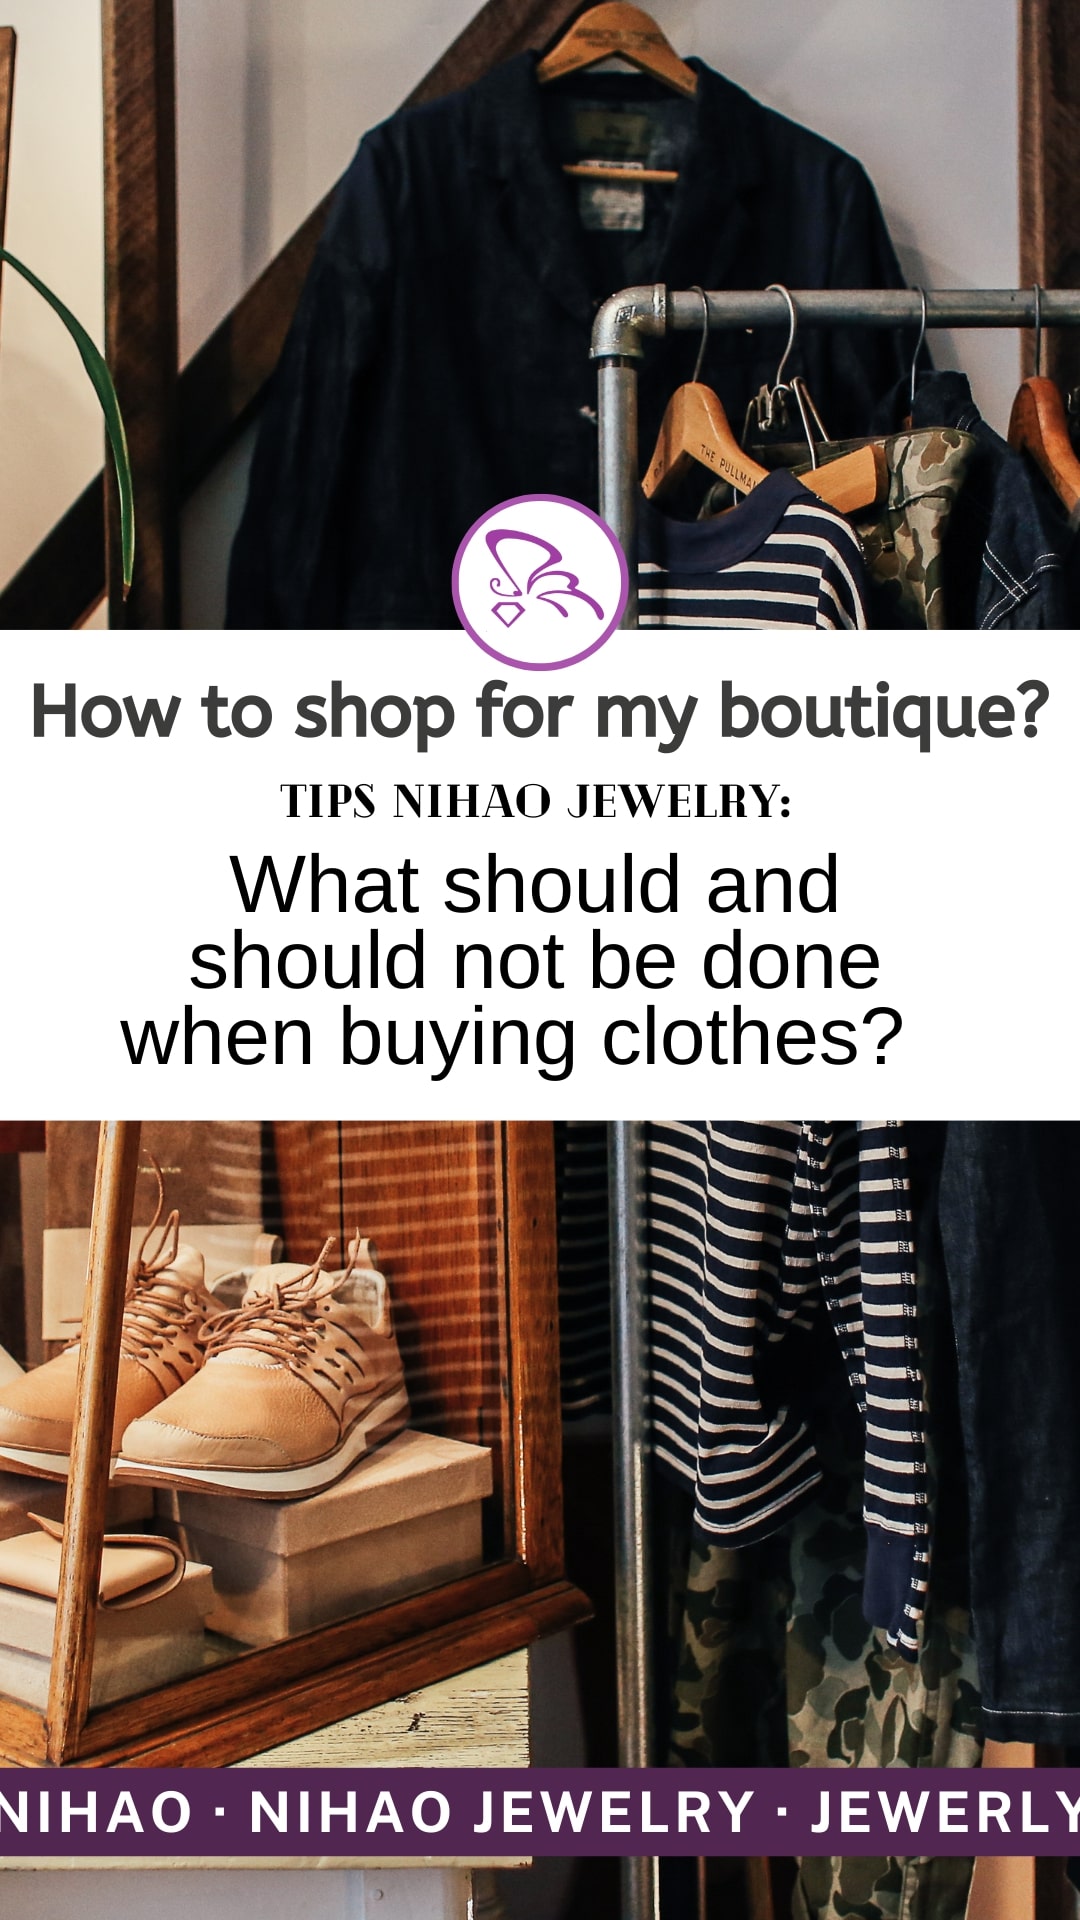 what should and should not be done when buying clothes